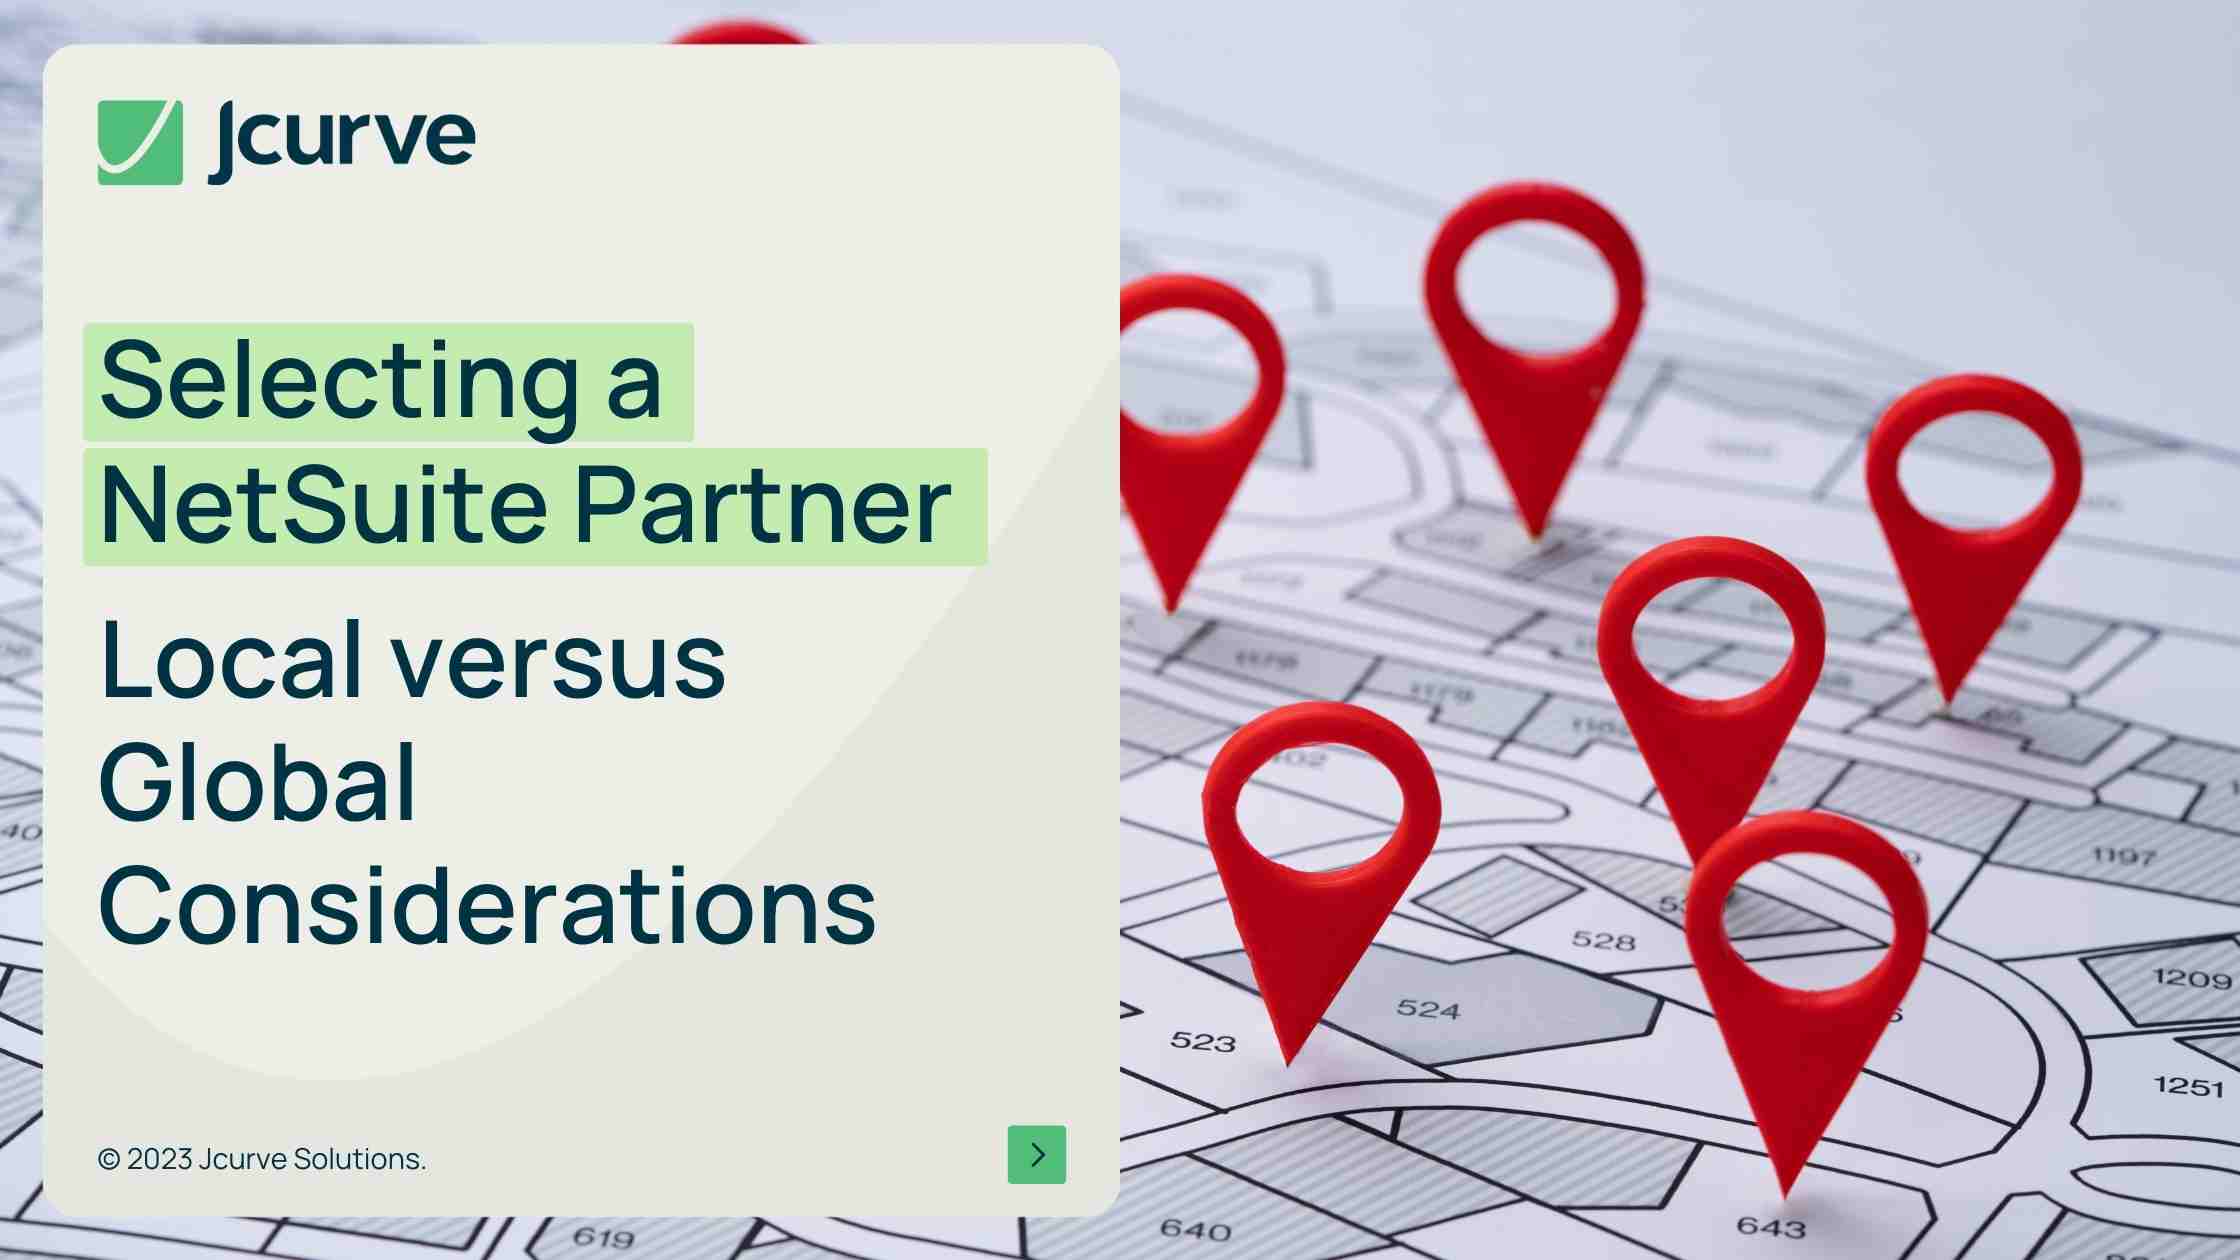 Selecting a NetSuite Partner: Local versus Global Considerations